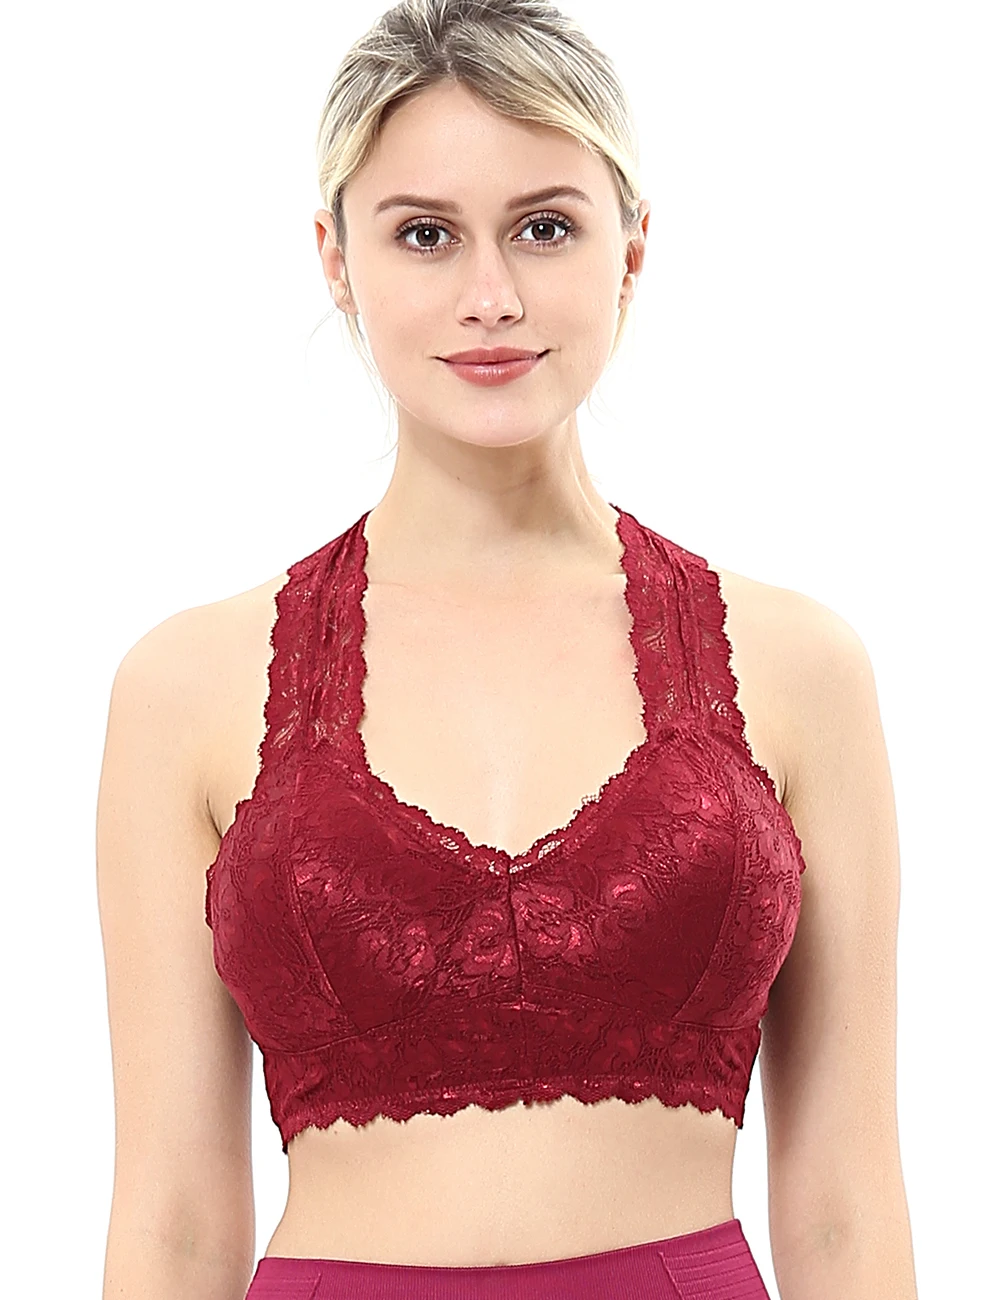 Women Floral Lace Bralette Padded Sexy Racerback Breathable Deep V Neck  Wireless Plunge Bra - Buy Lace Bralette Padded,Plunge Bra,Deep V Neck Bra  Product on Alibaba.com